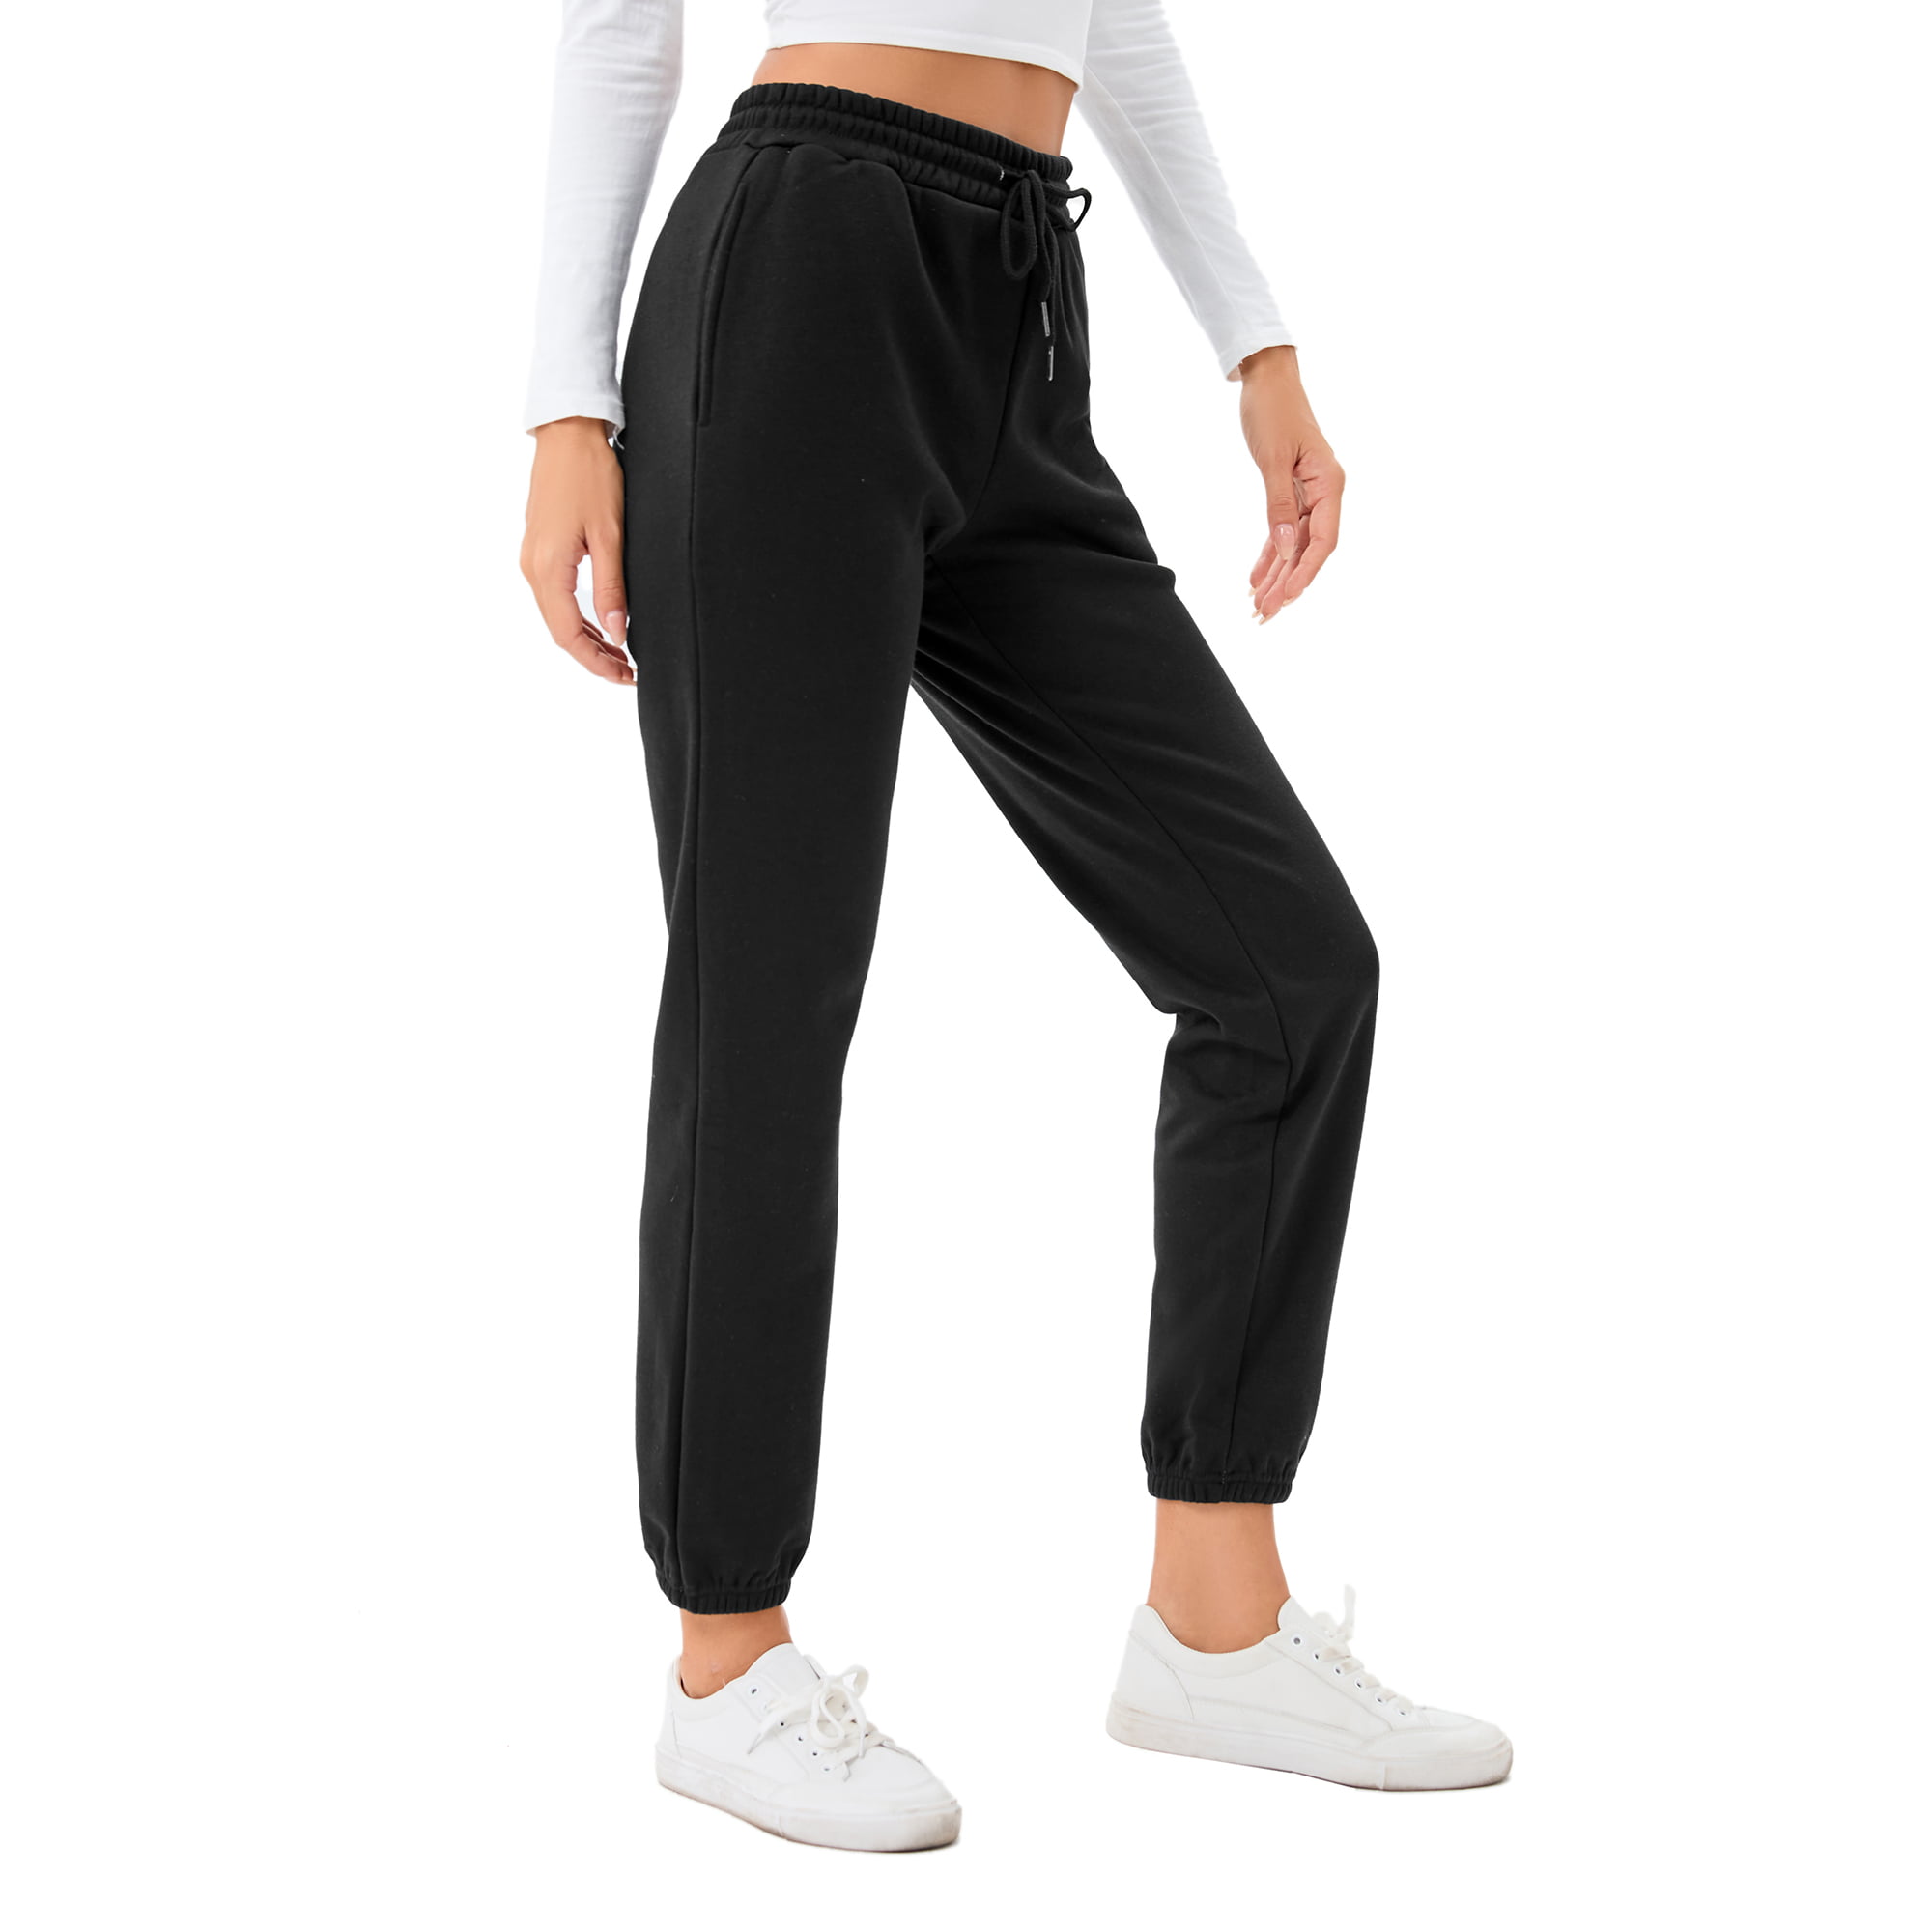 Fleece Lined Sport Pants for Women with Pockets, Winter Workout Running  Thick Yoga Pants Warm Joggers, Black